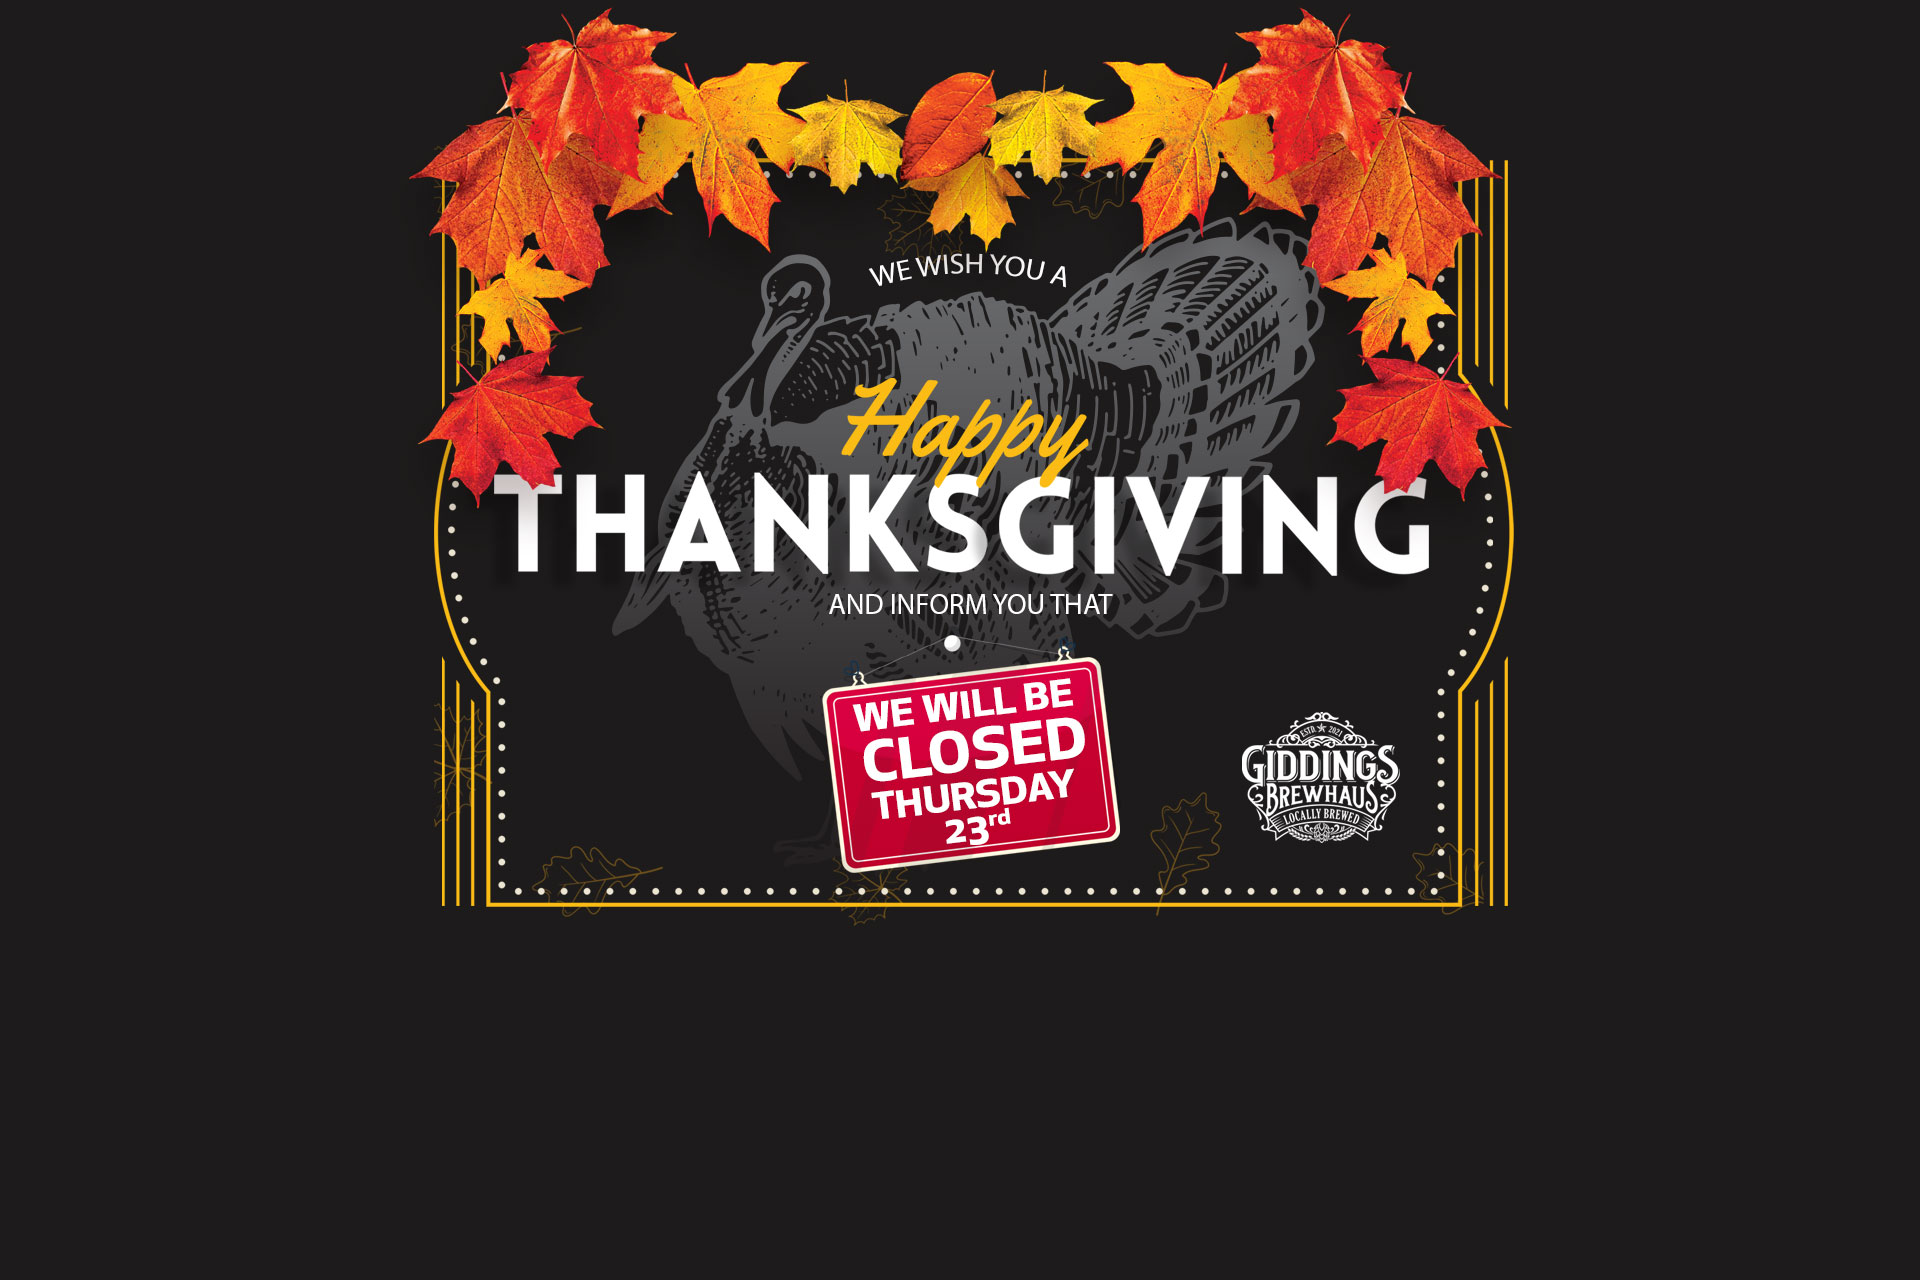 We will be closed on Thursday 23rd due to Thanksgiving